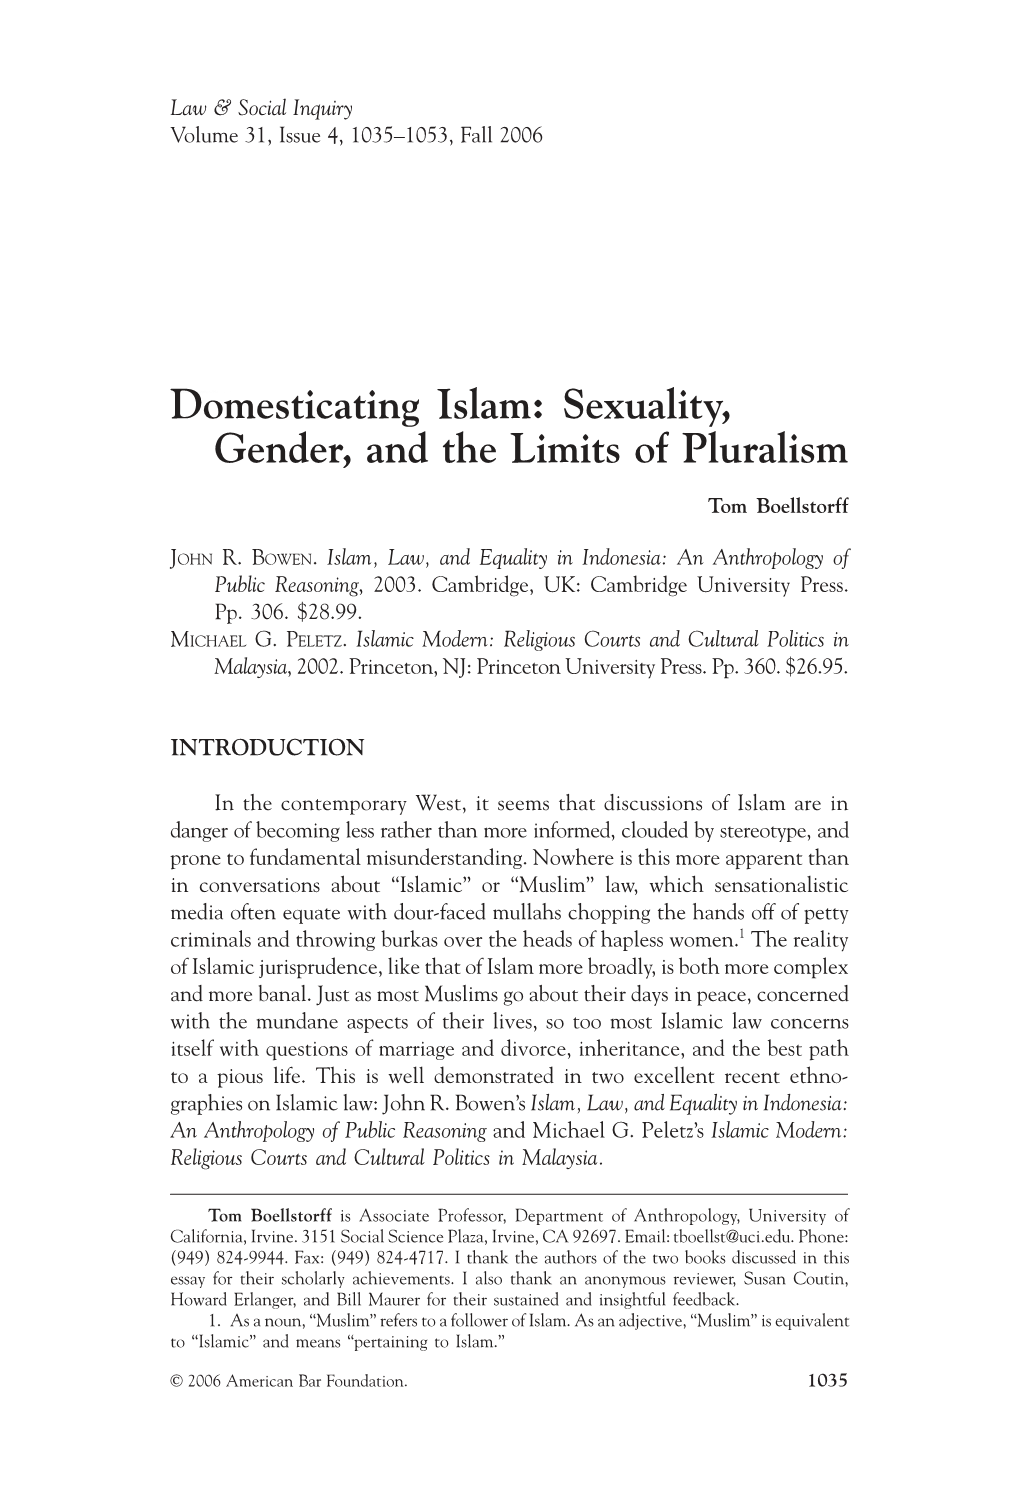 Domesticating Islam: Sexuality, Gender, and the Limits of Pluralism